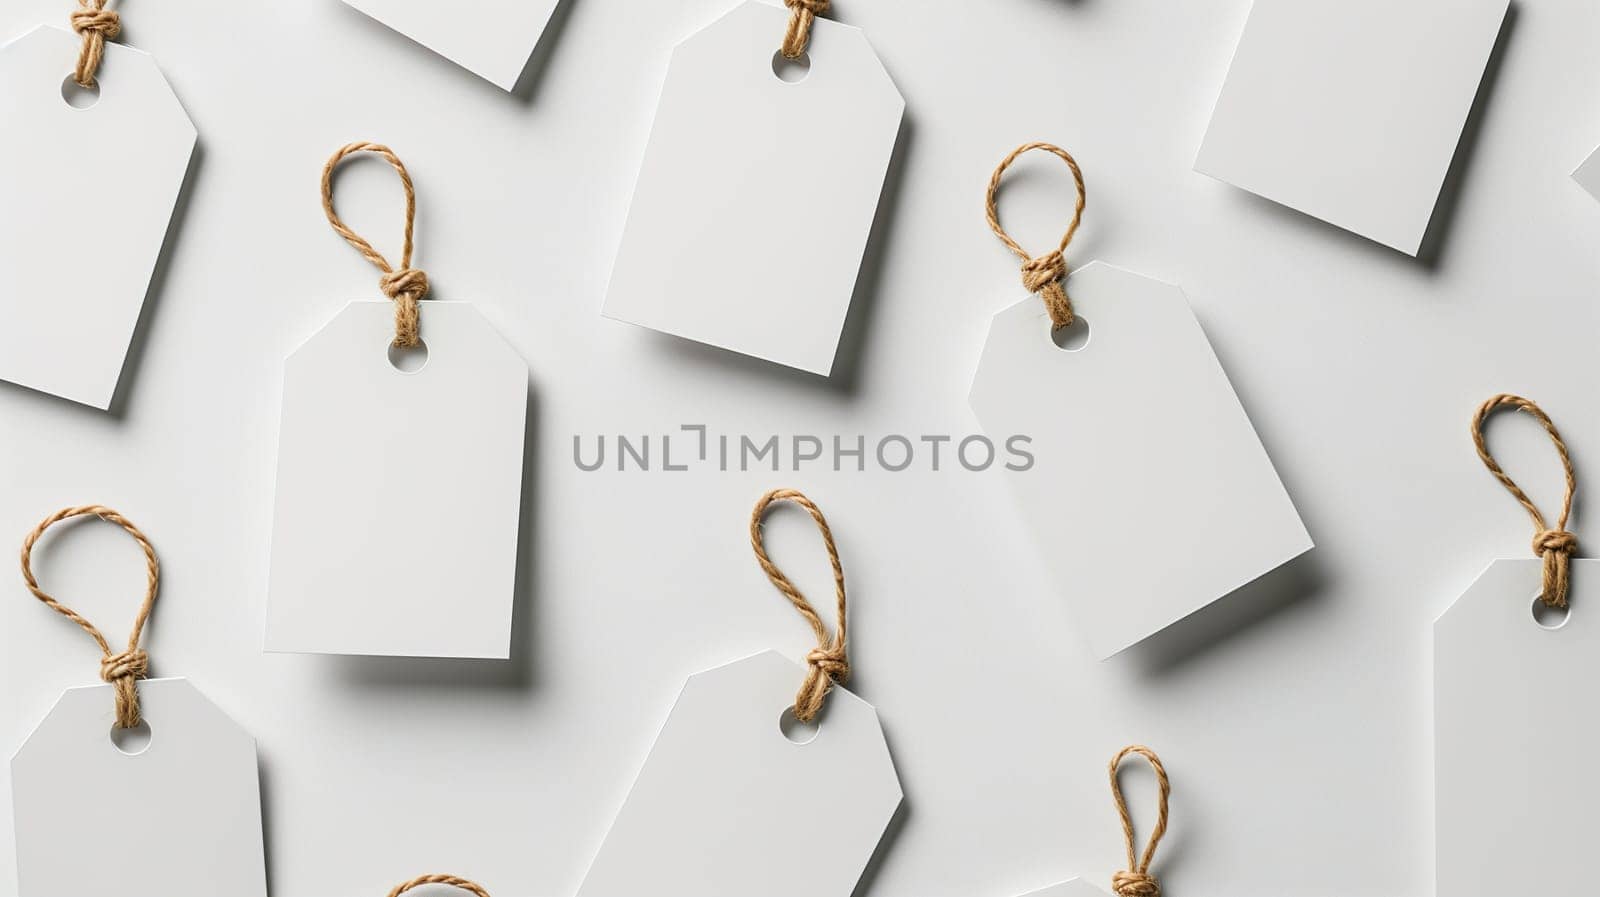 Several white tags are neatly arranged and tied with twine on a clean white surface. The tags are ready for labeling or pricing in a minimalist and organized setting.